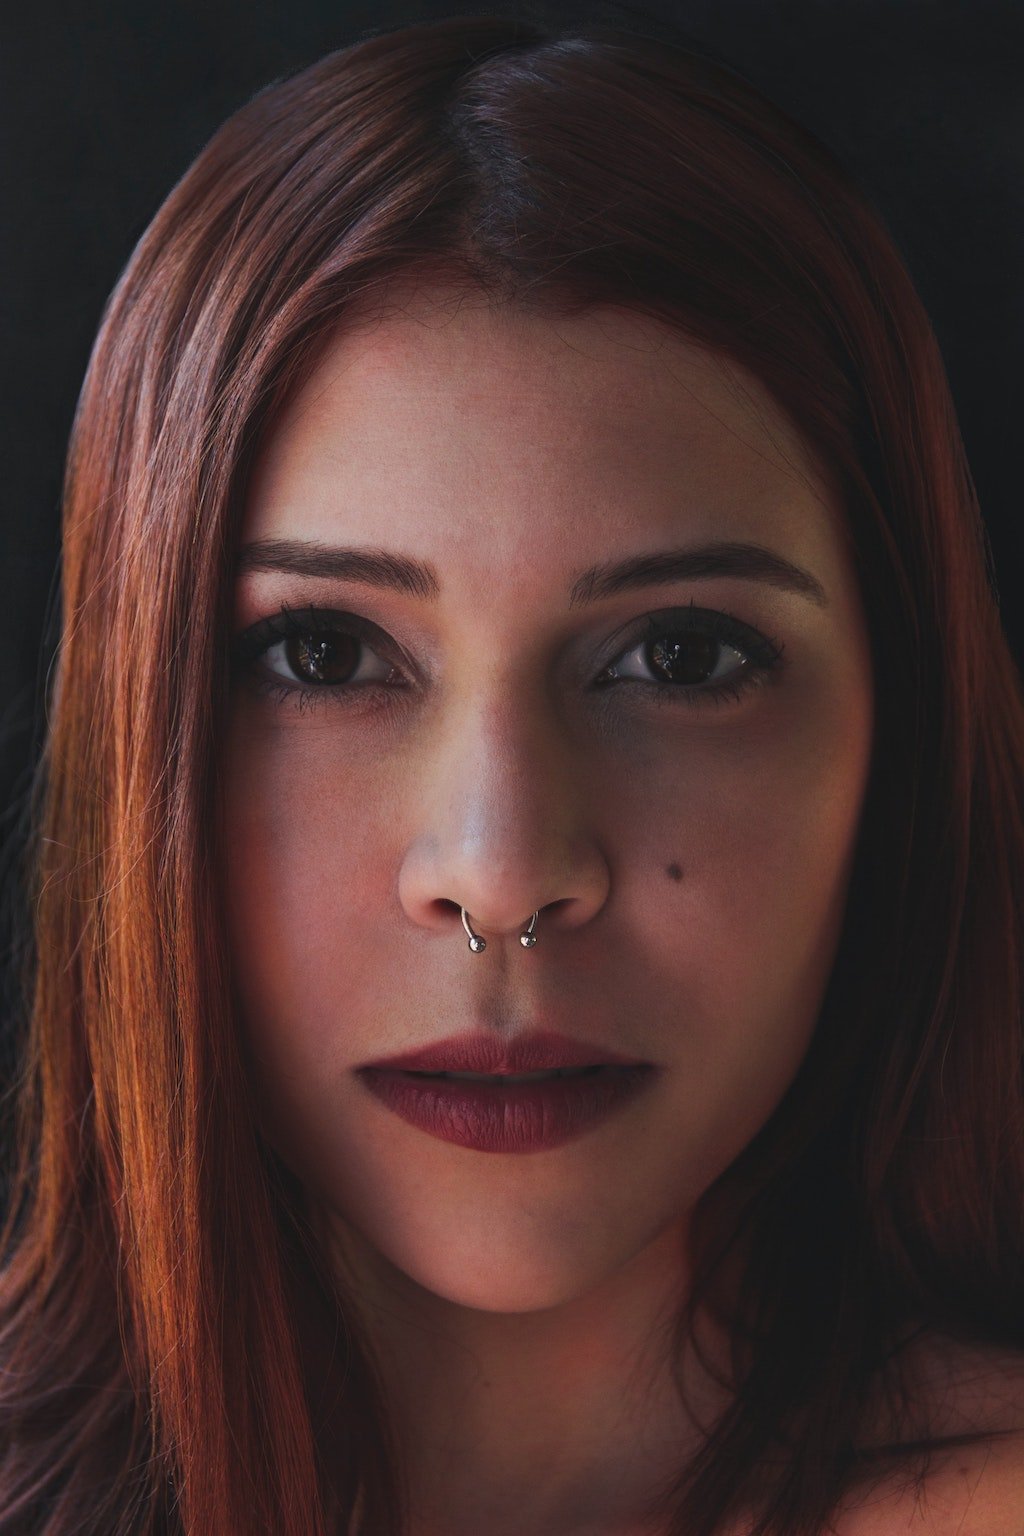 woman with septum piercing